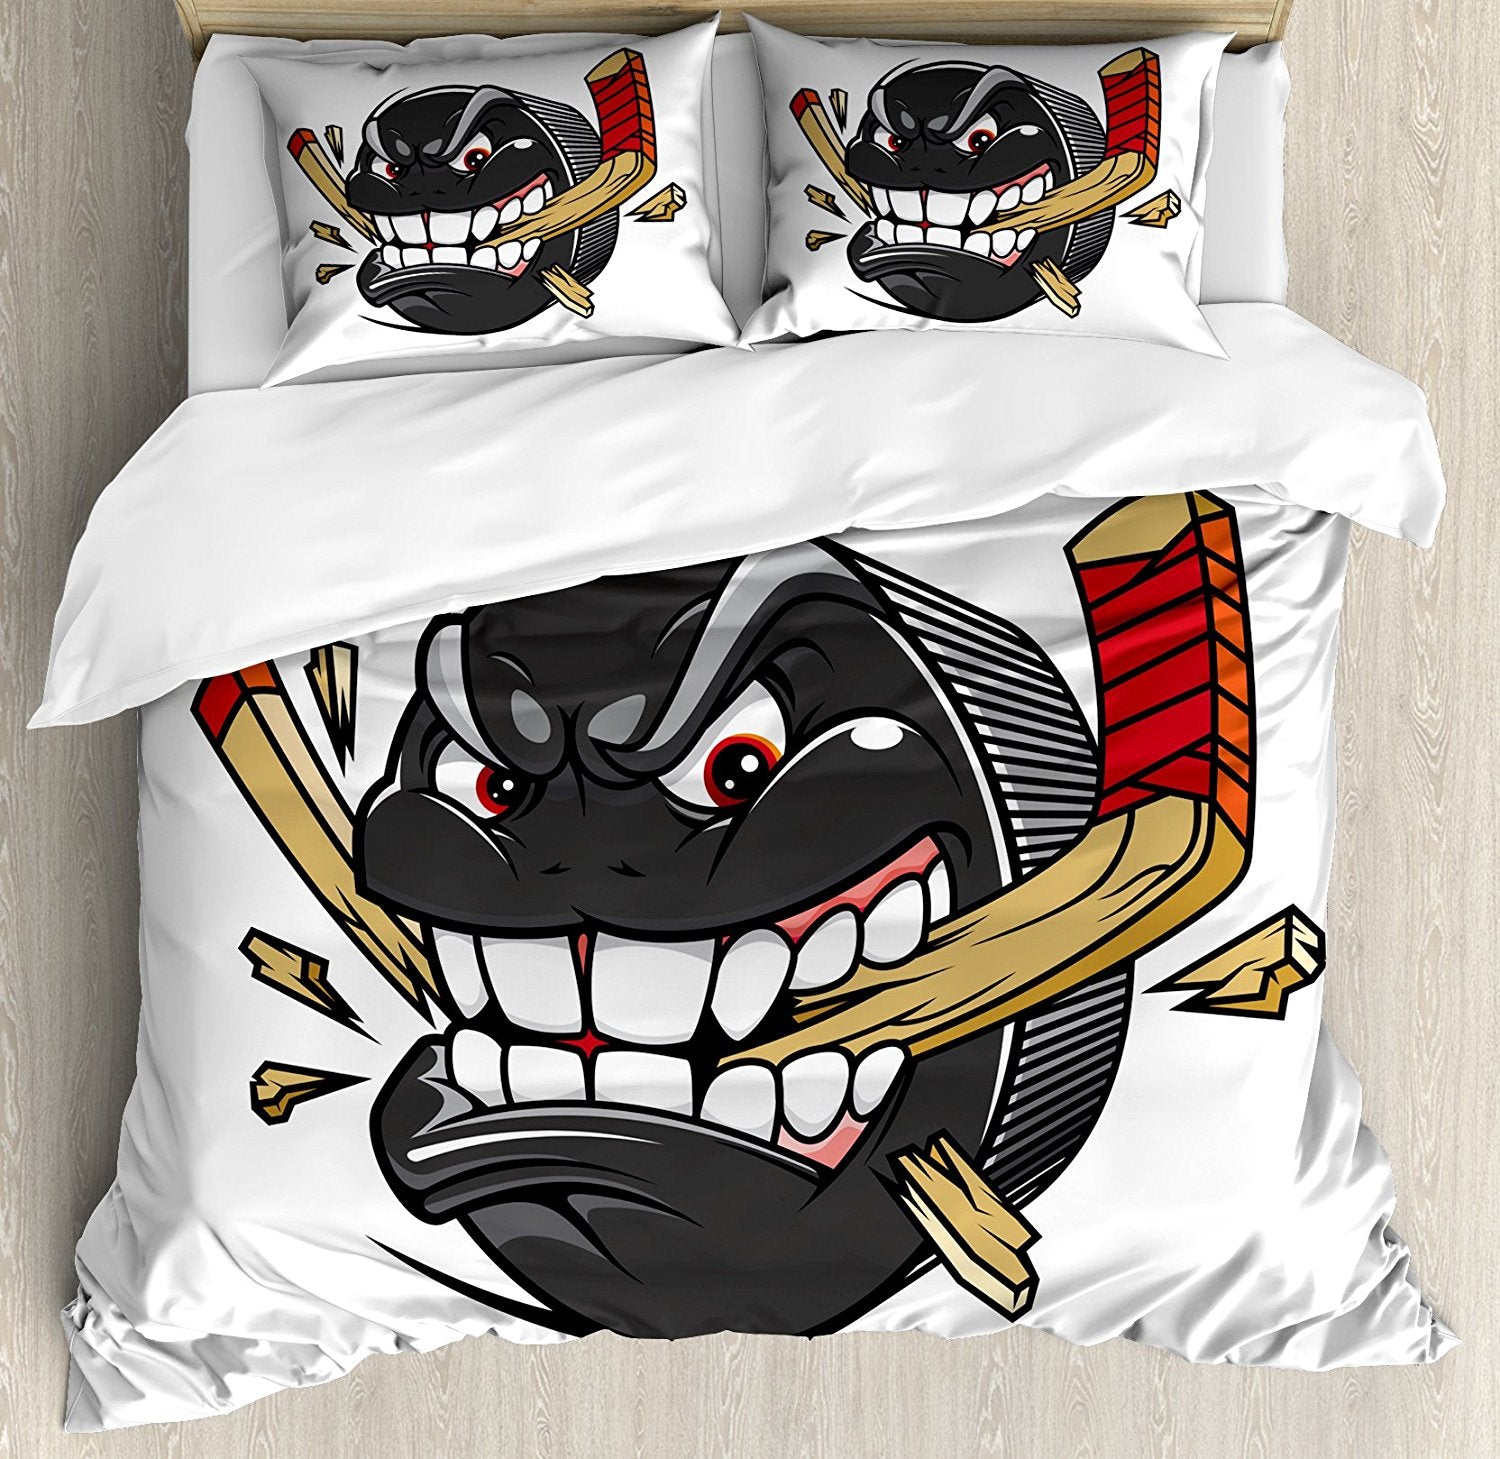 3d Hockey Puck Bedding Set Duvet Cover Pillow Cases And Bed Sheet